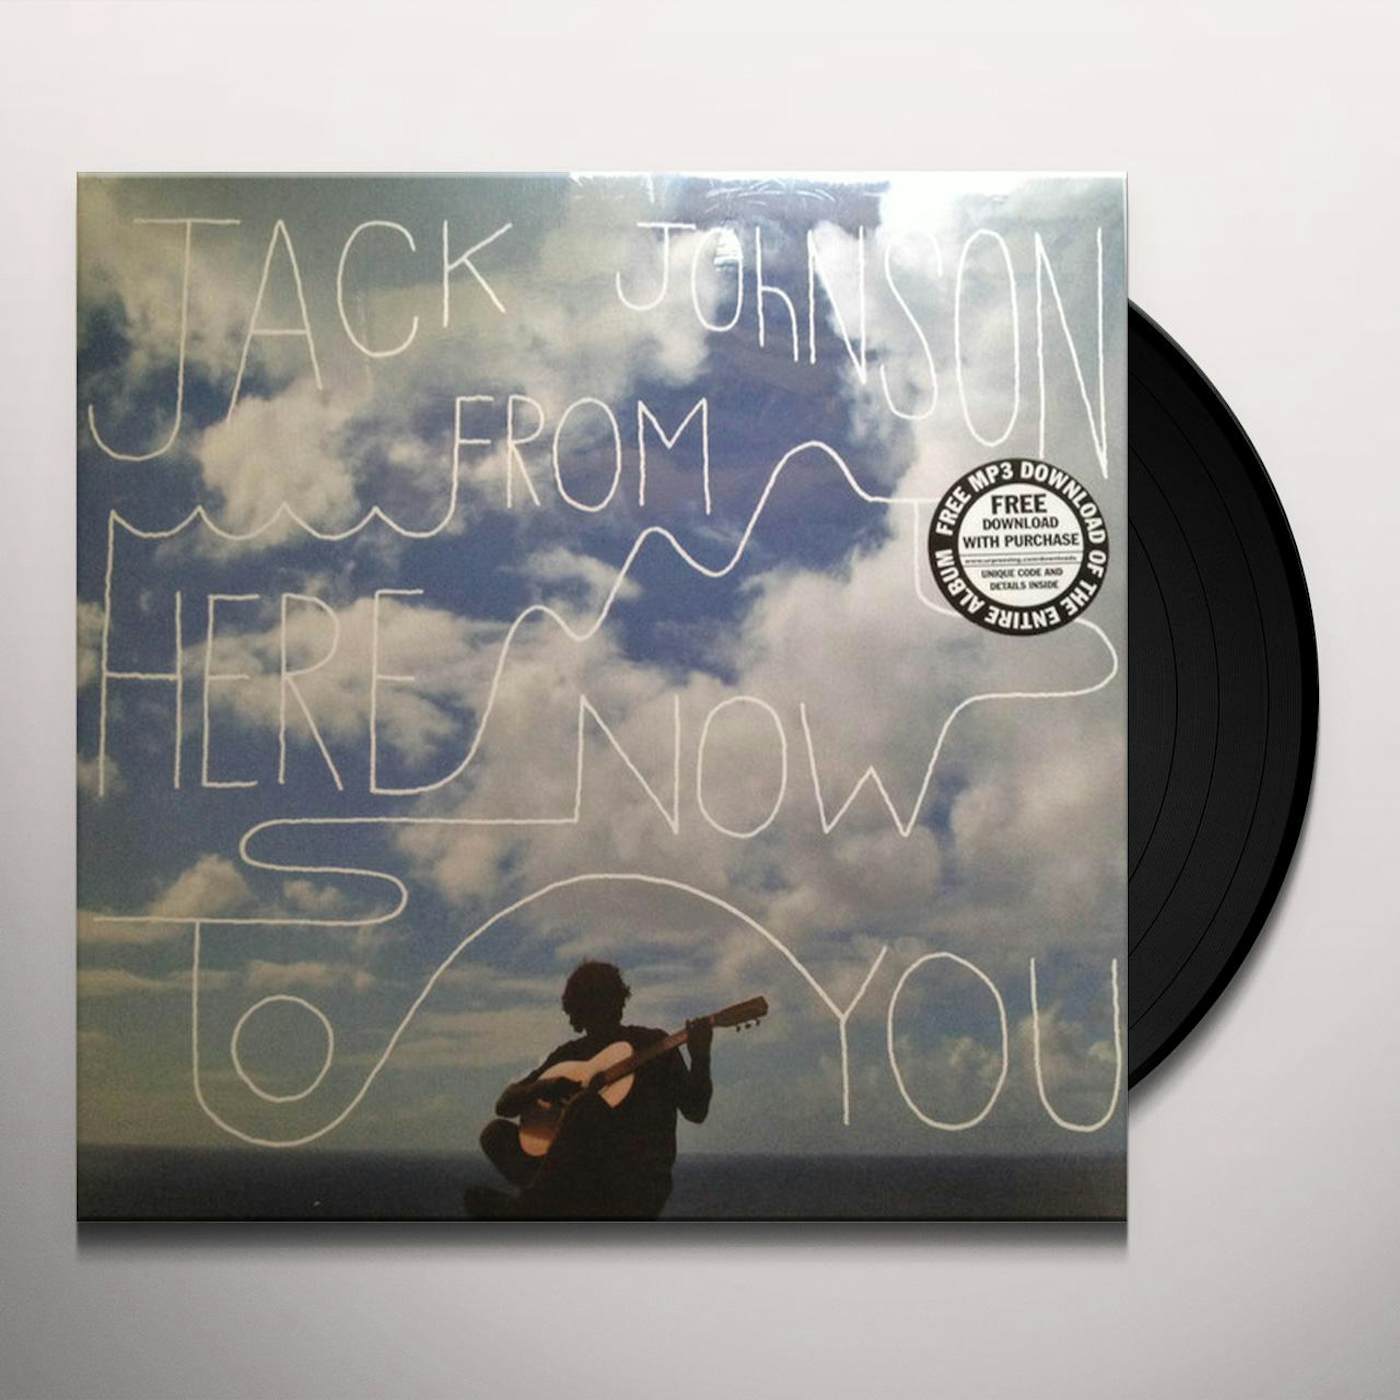 Jack Johnson From Here To Now To You Vinyl Record